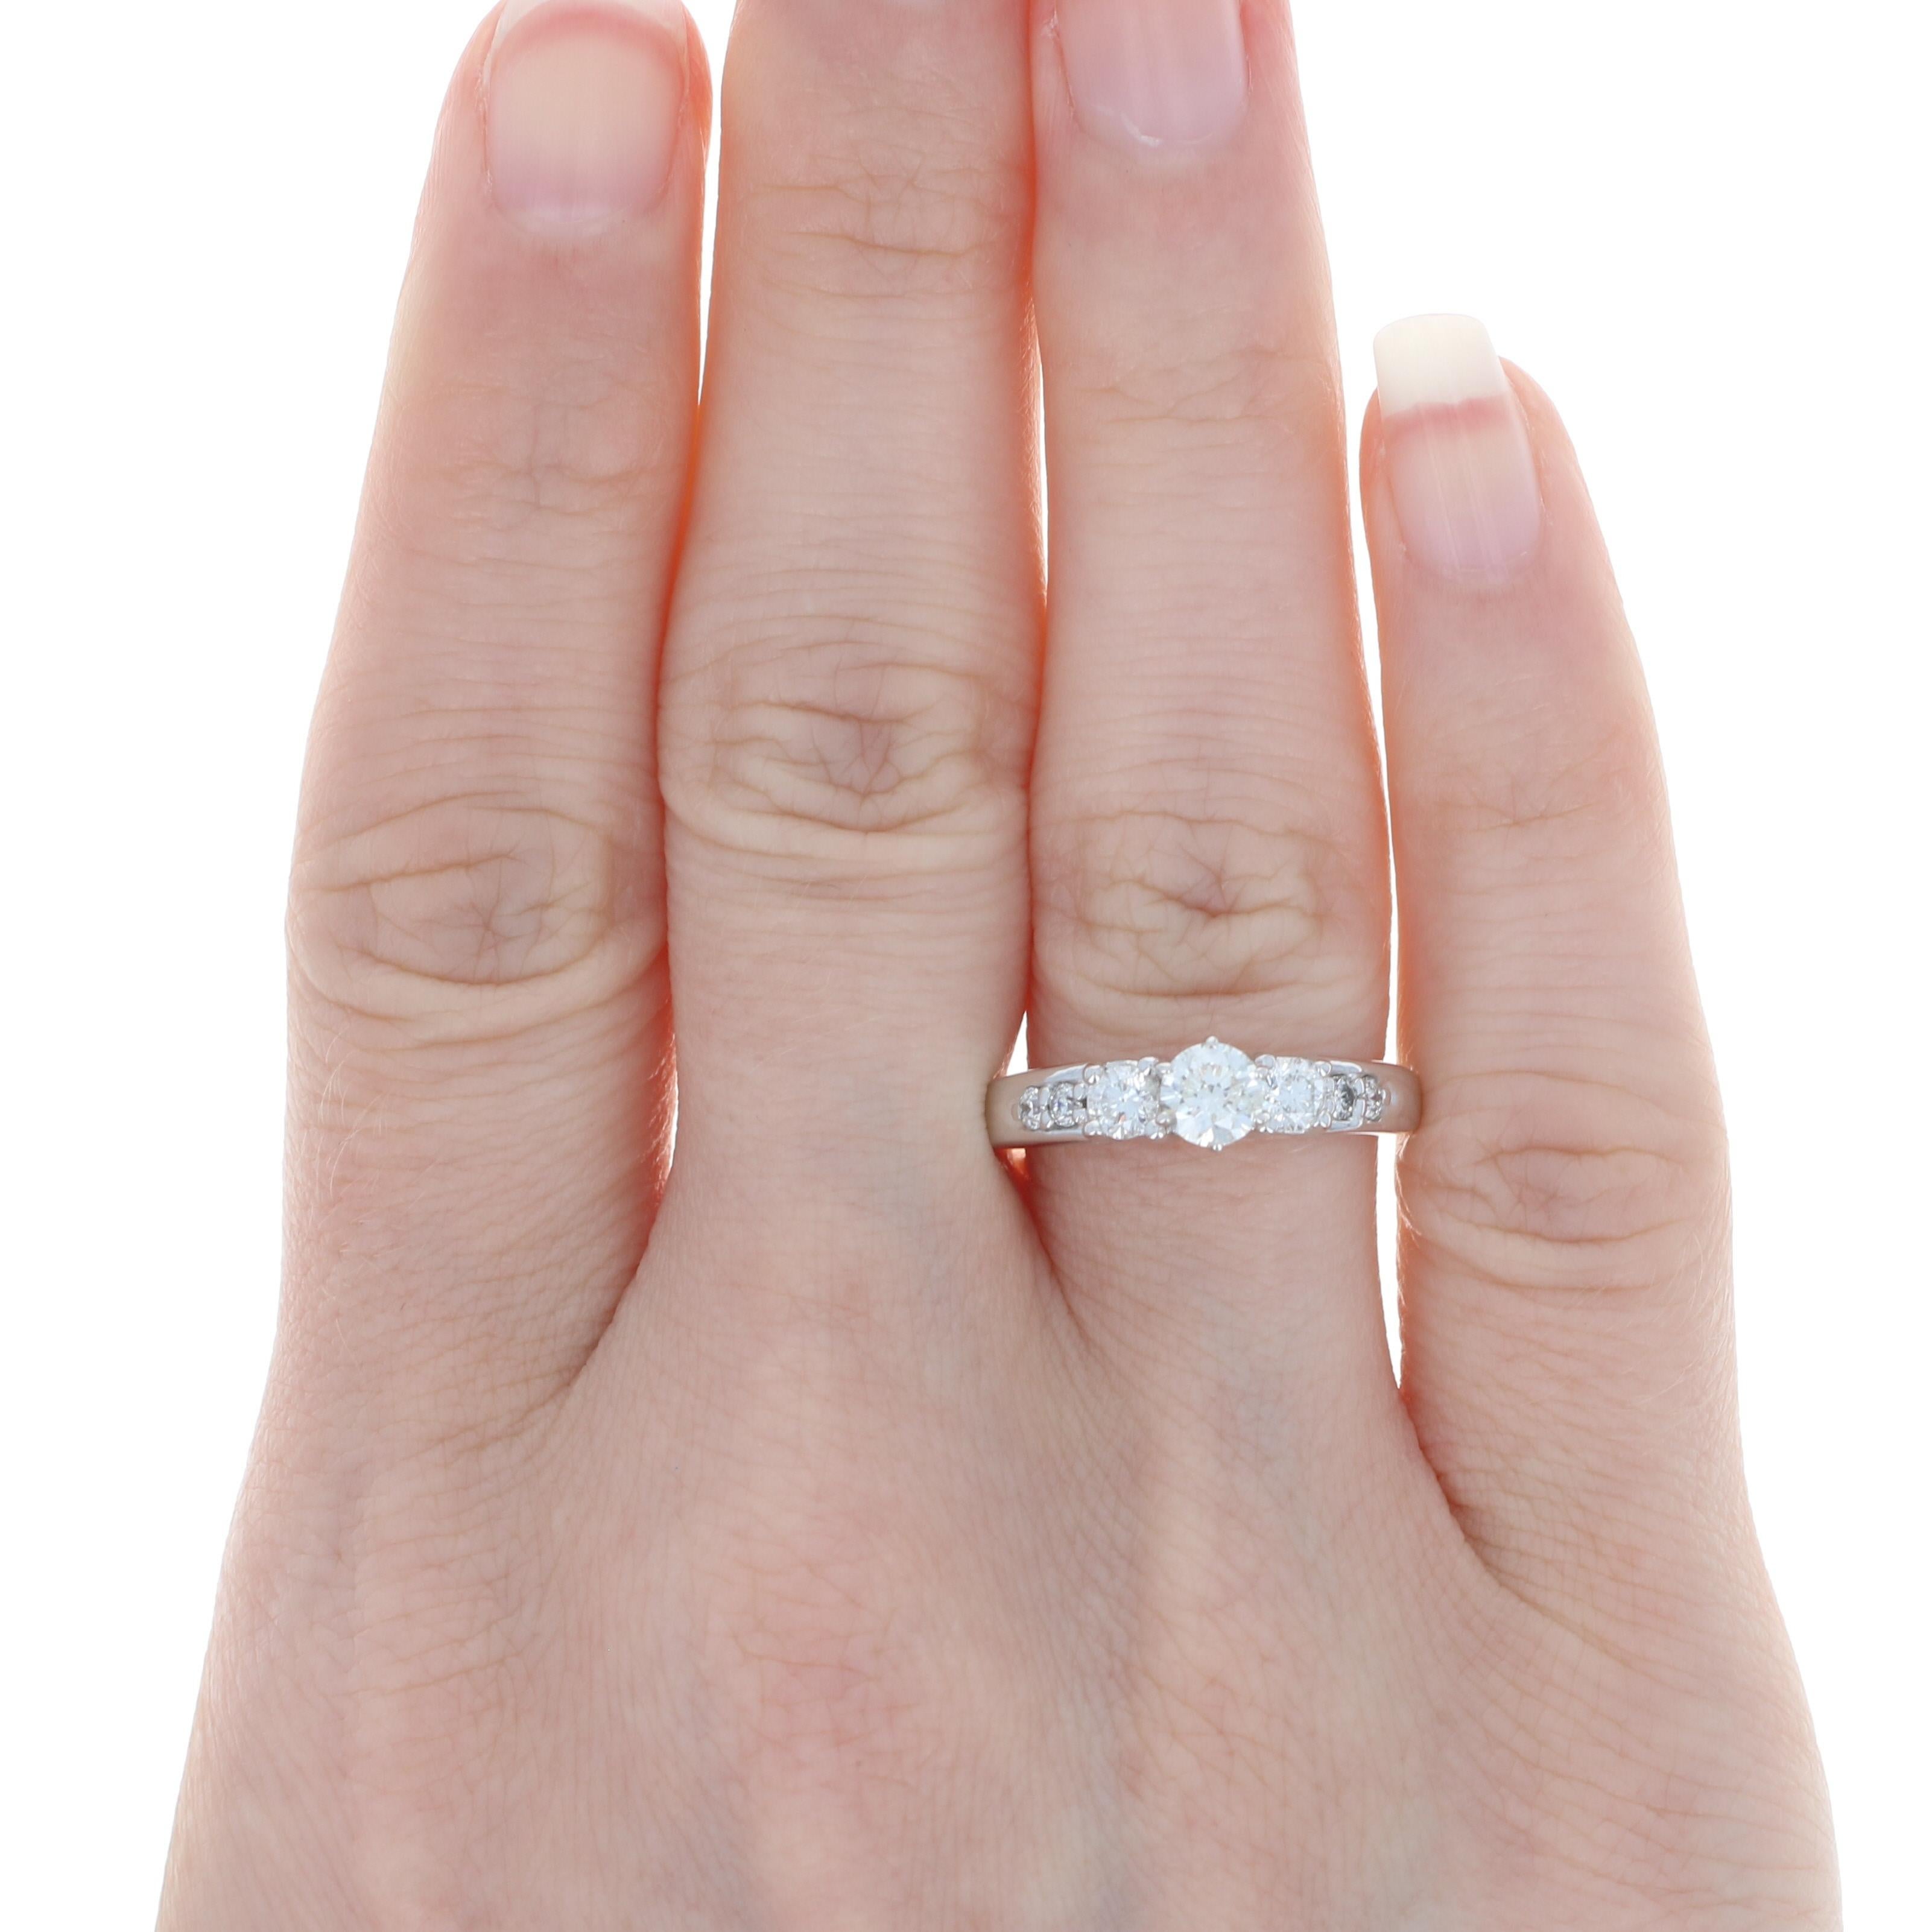 Like effervescent champagne sparkling in candlelight, this radiant engagement ring will absolutely delight your sweetheart! This 14k white gold piece showcases a resplendent diamond solitaire that is held in a raised four-prong mount above a